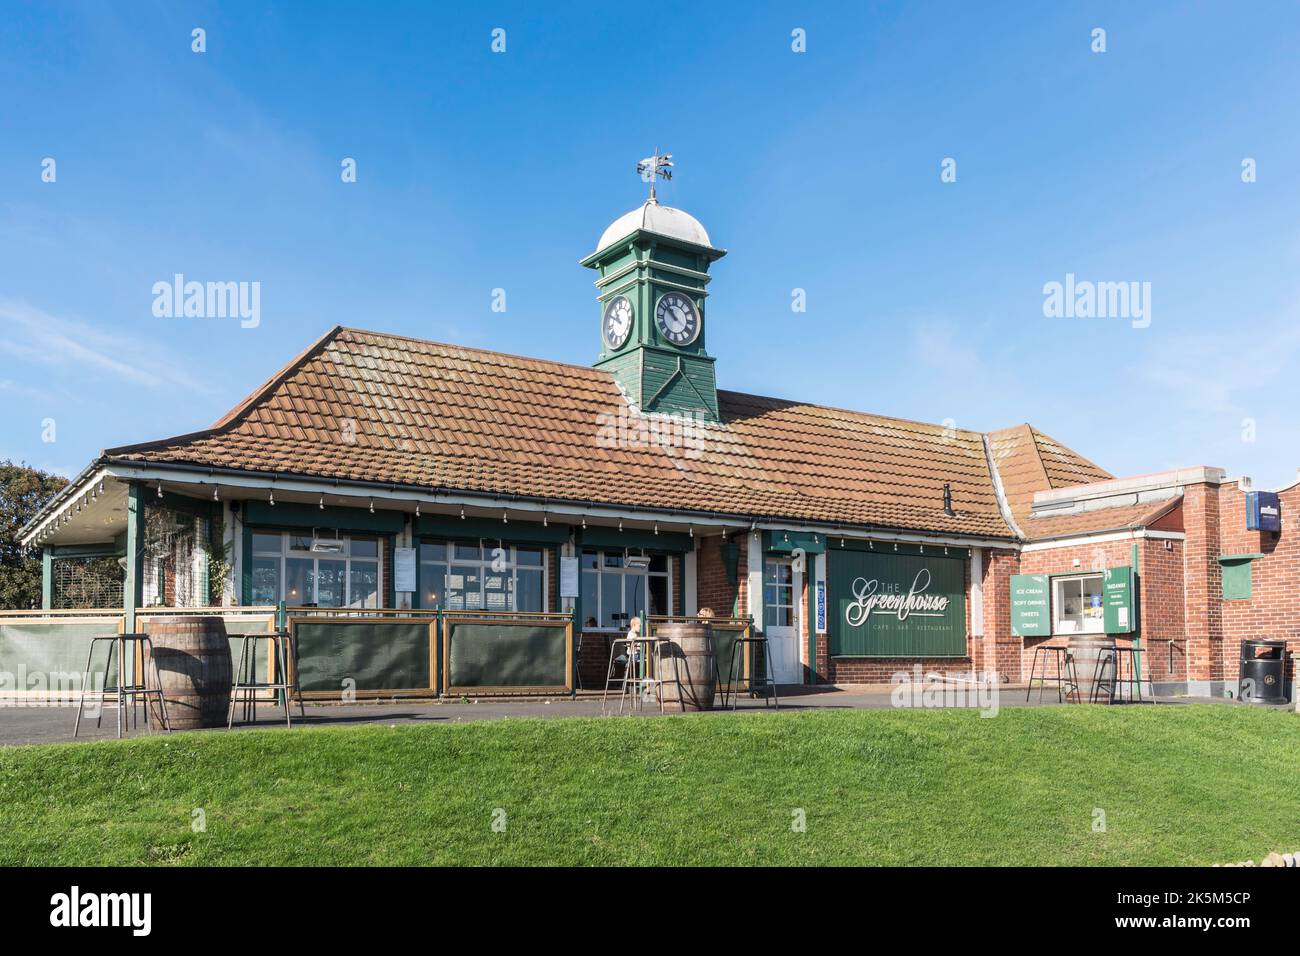 The Greenhouse Café or Clock Tower Café in Tynemouth Park, North Tyneside, England, UK Stock Photo